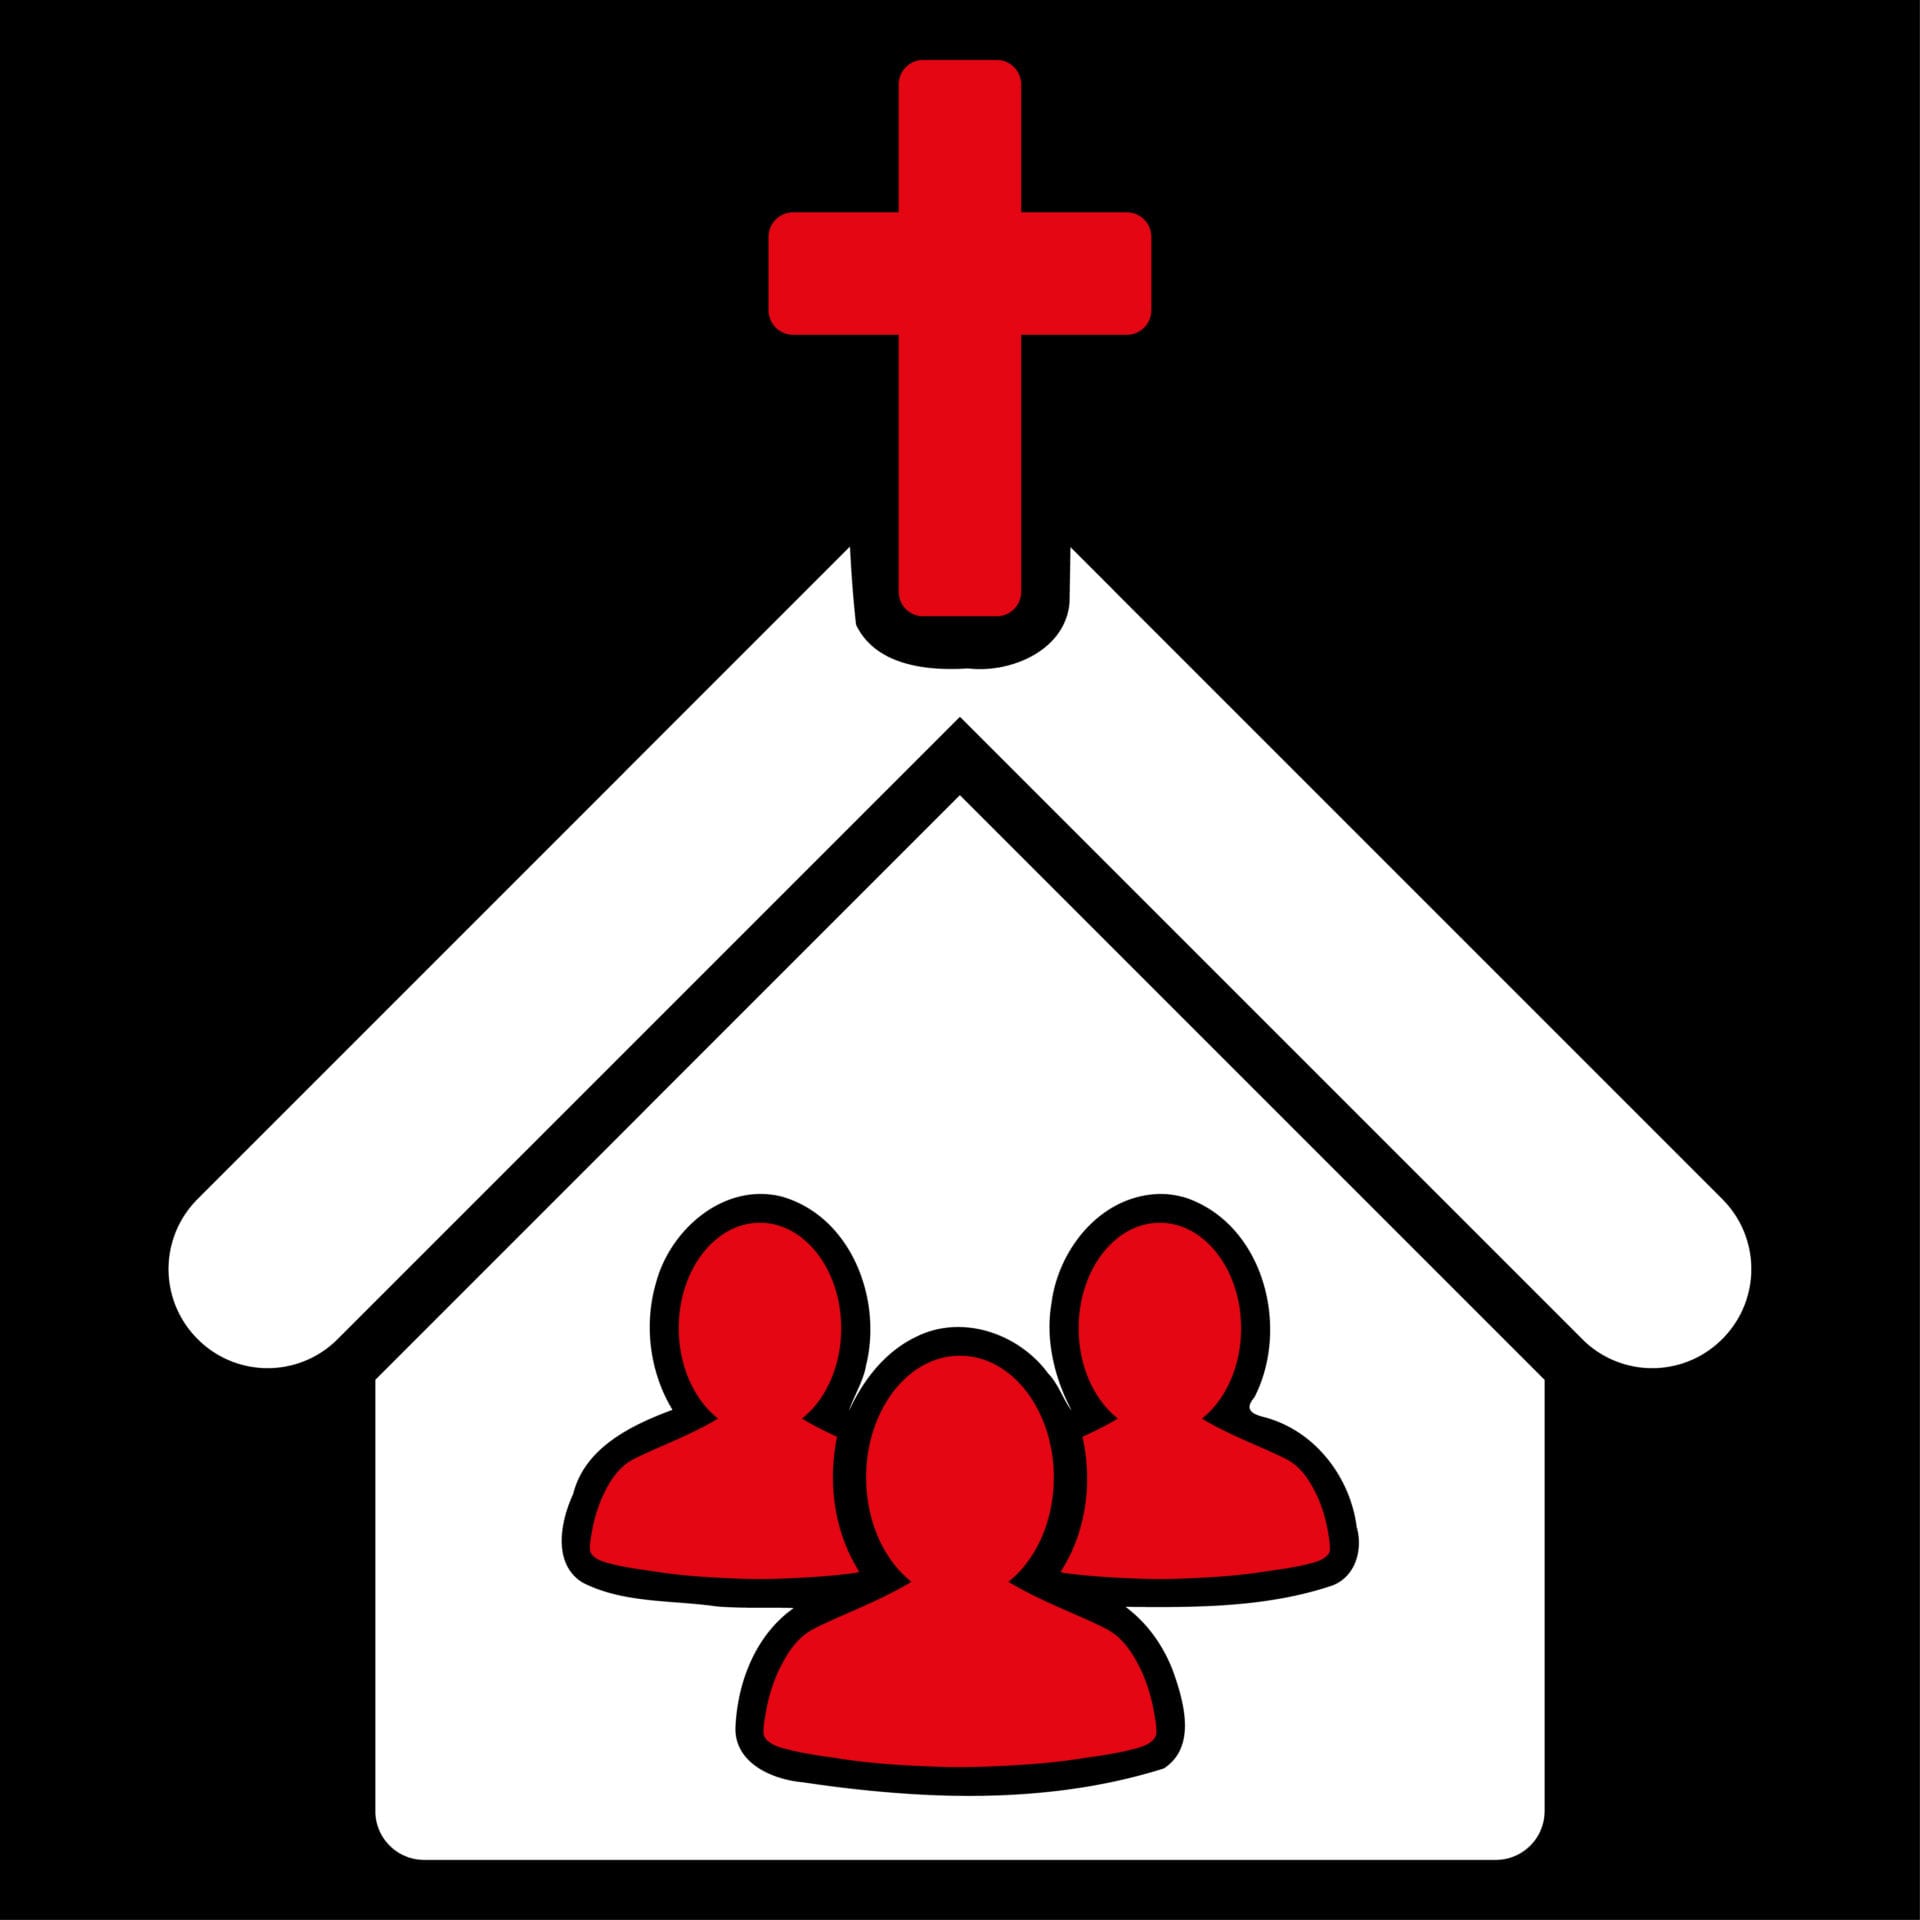 Church Staff - Red and White